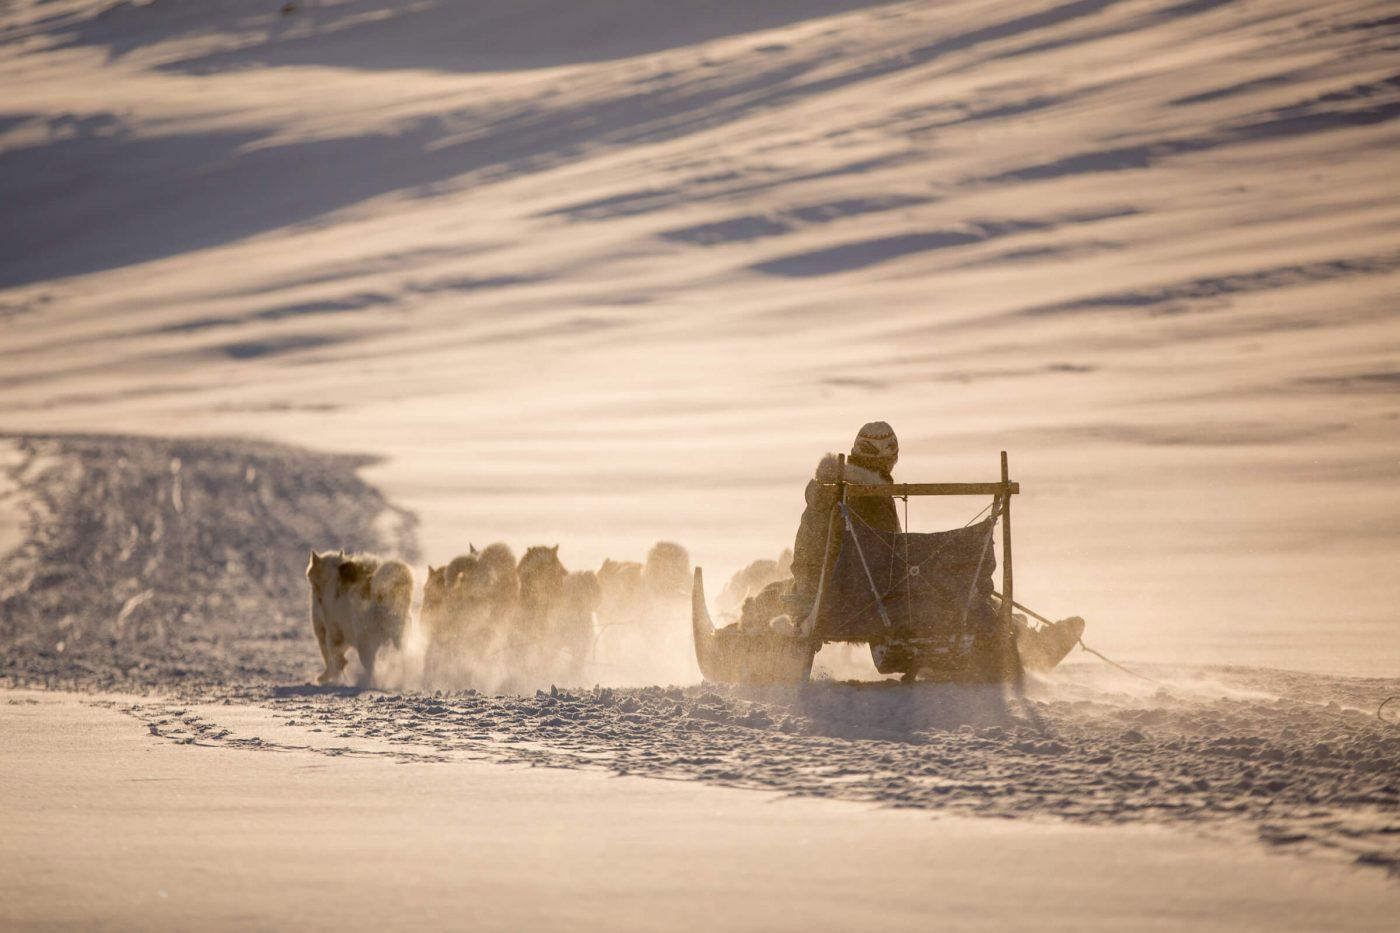 A dog sled heading home towards Sisimiut in Greenland in the setting sun. Photo by Mads Pihl